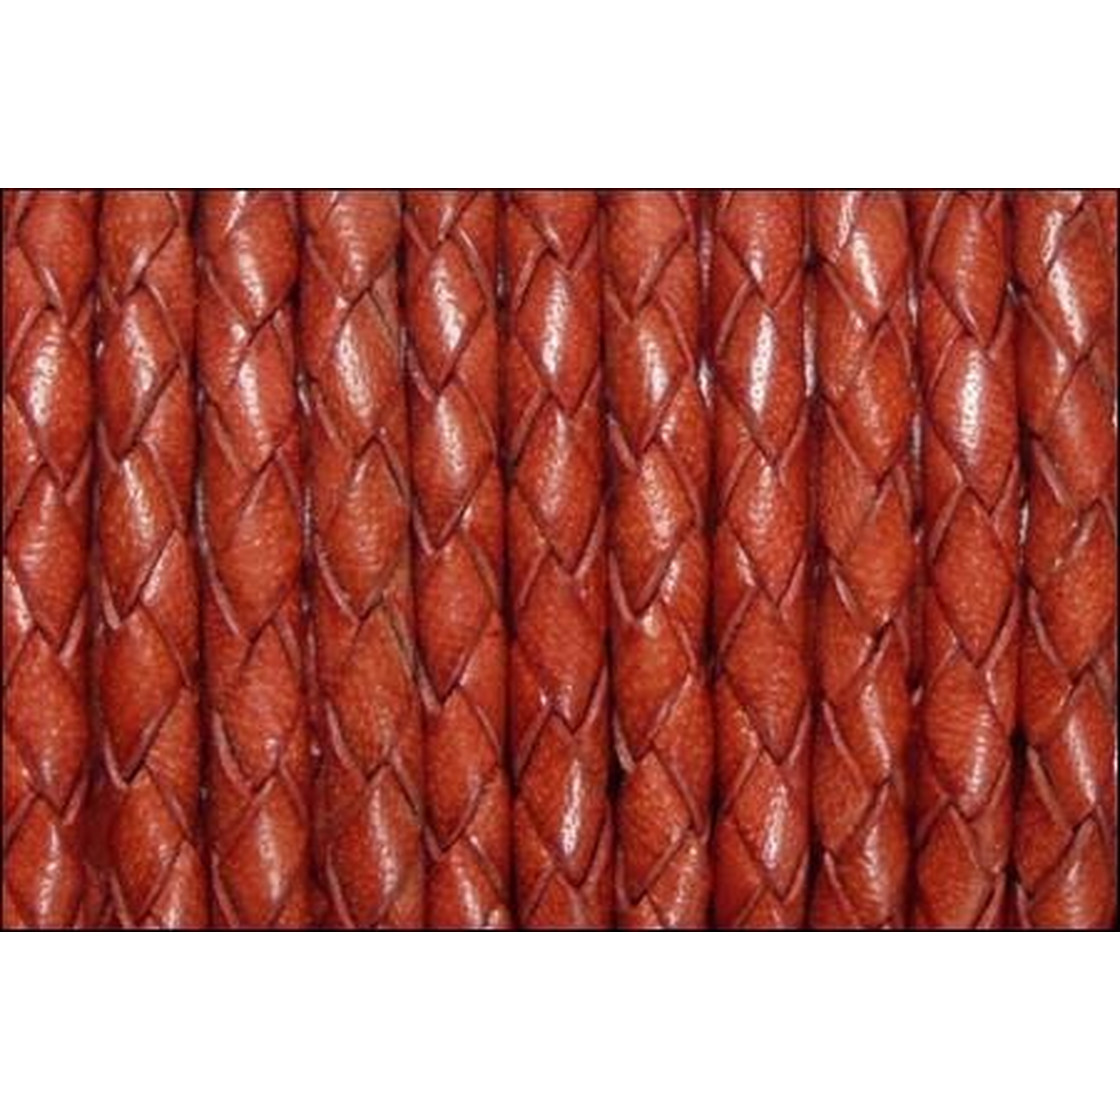 Round braided leather cord Ø5,0mm - coral red, 7,38 €